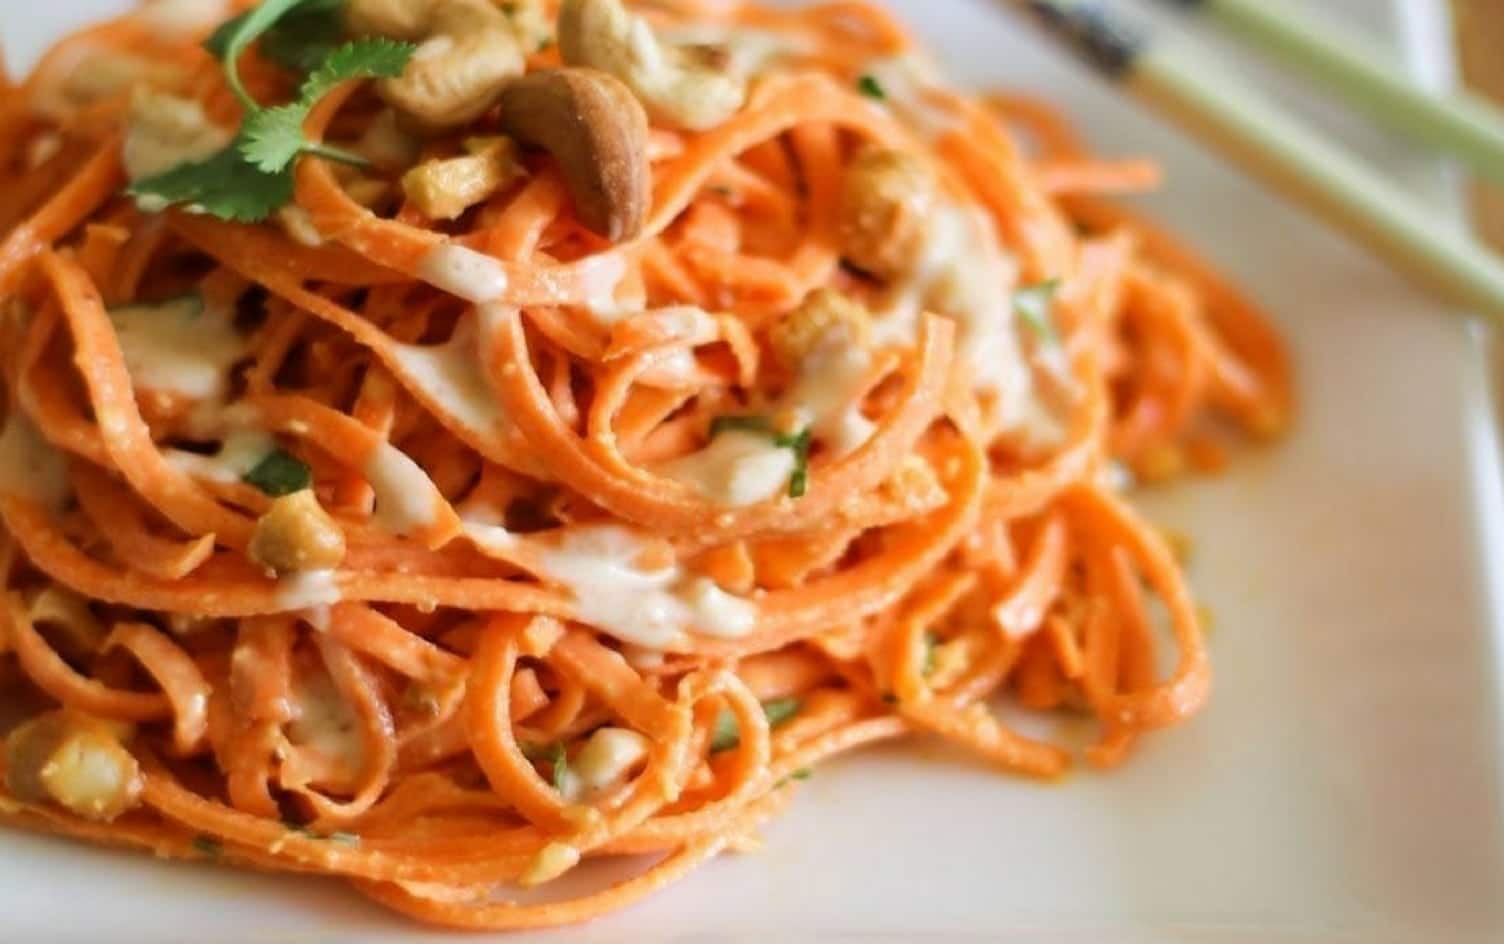 15 No-Cook Lunches Under 430 Calories